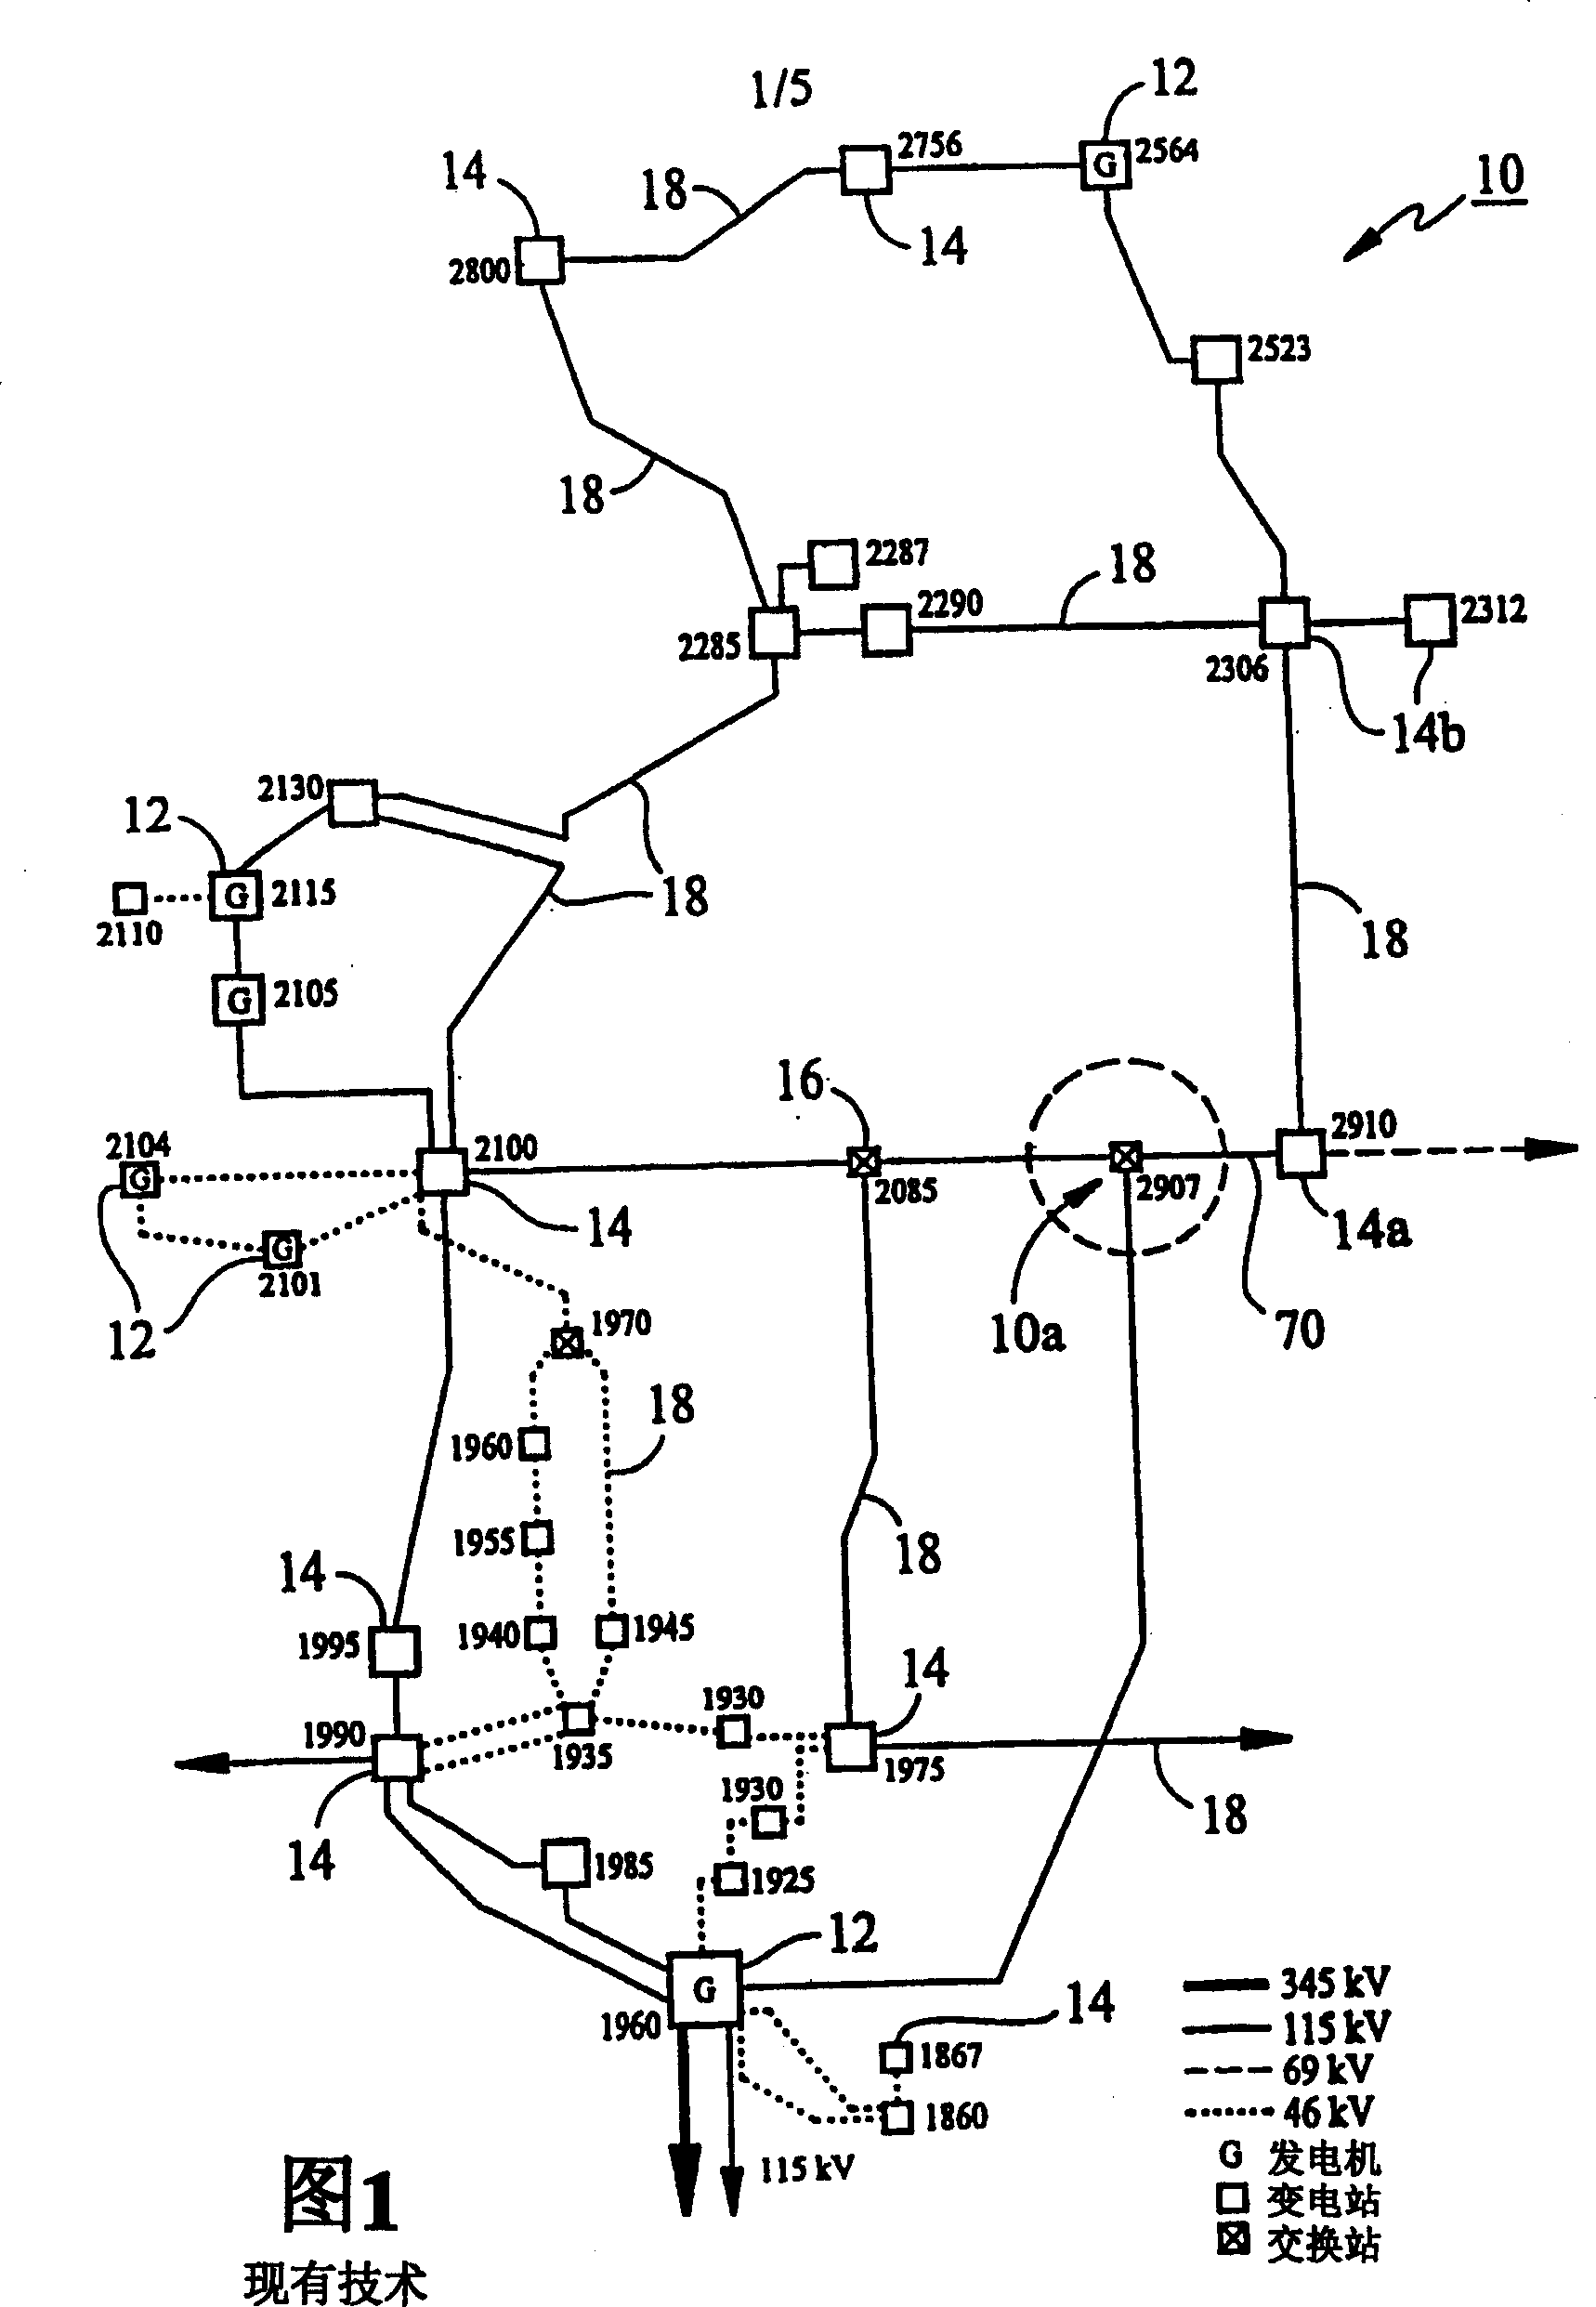 Method and system for providing voltage support to a load connected to a utility power network